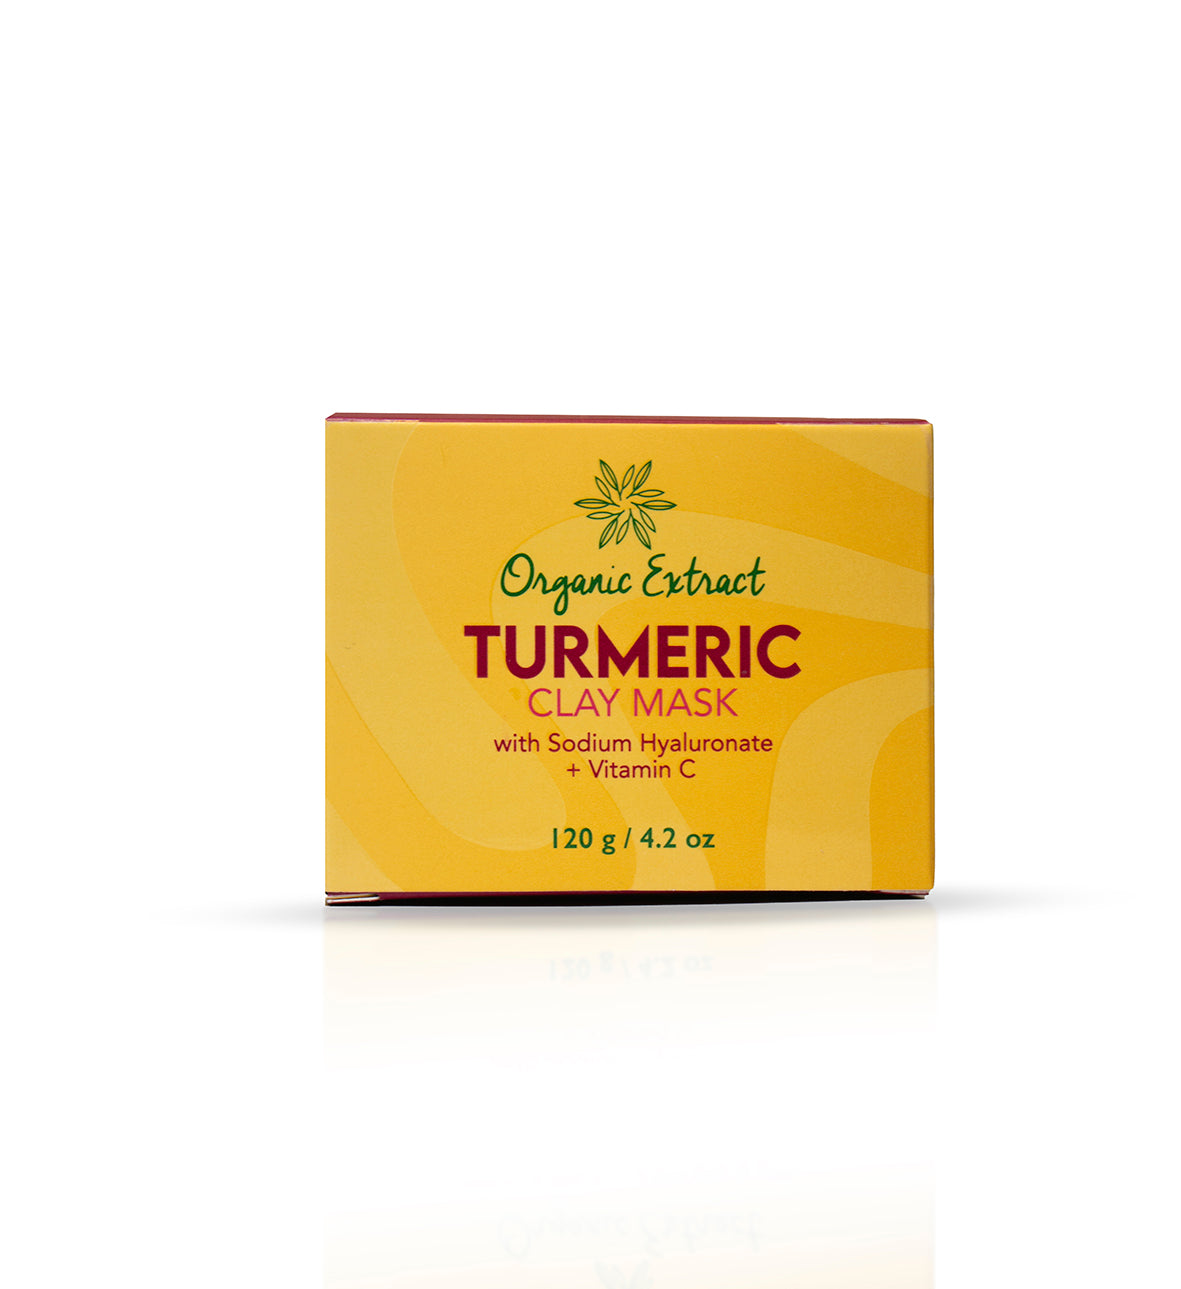 Organic Extract Turmeric Clay Mask 120g Mitchell Brands - Mitchell Brands - Skin Lightening, Skin Brightening, Fade Dark Spots, Shea Butter, Hair Growth Products